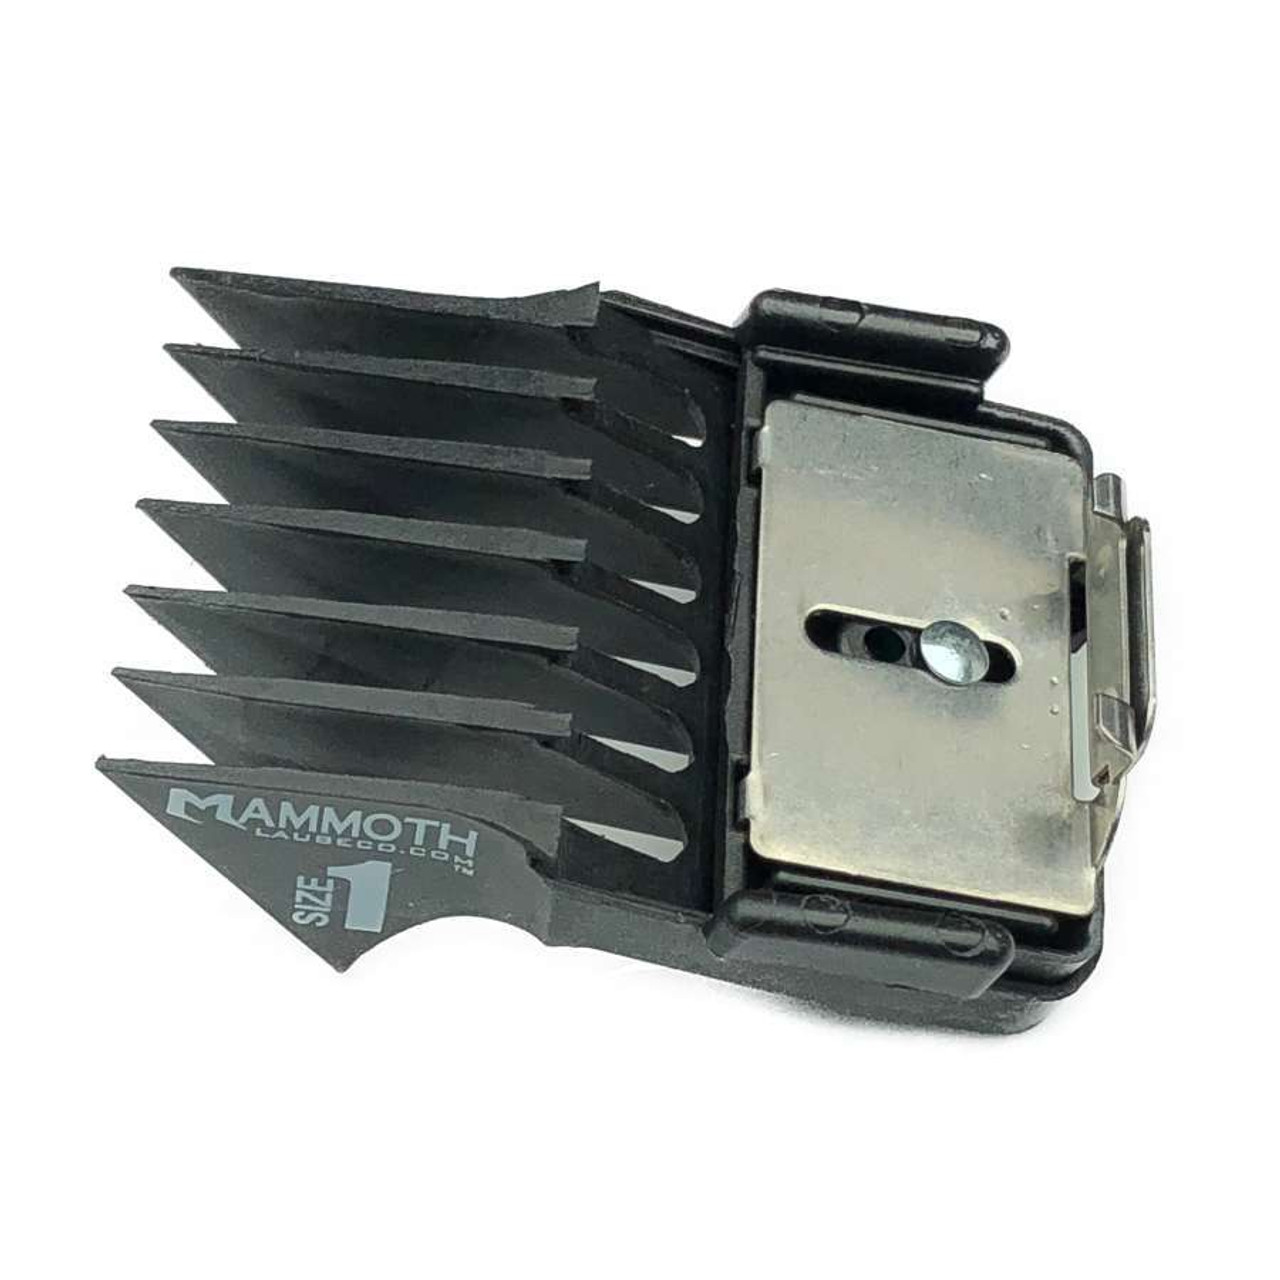 mammoth clipper combs